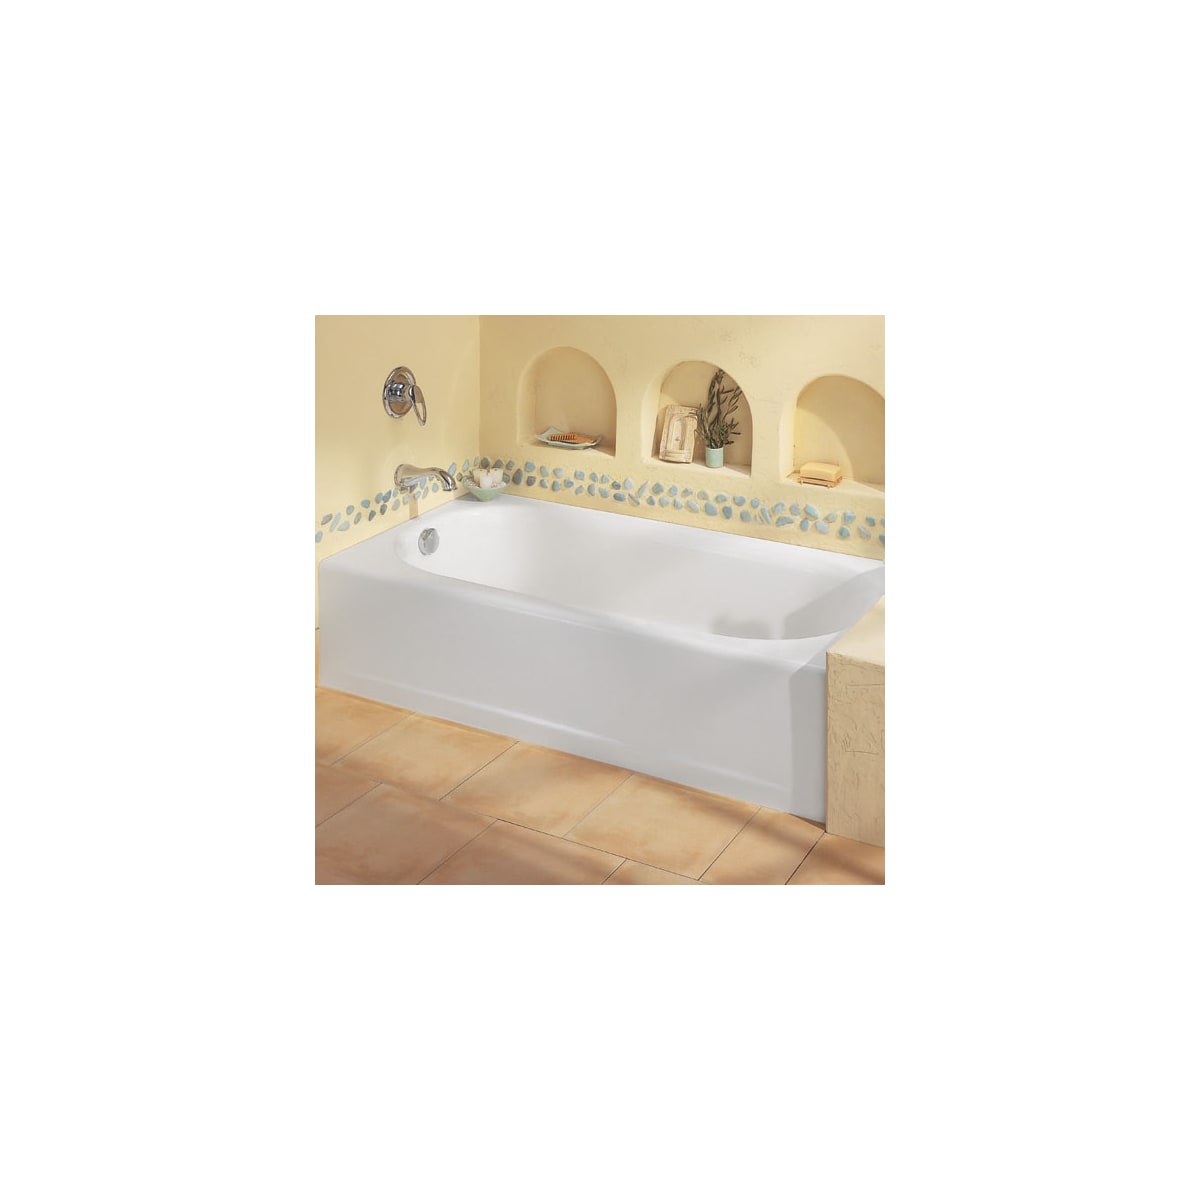 Alcove Bath Tub With Integral Overflow, American Standard Princeton Americast Bathtub With Integral Overflow